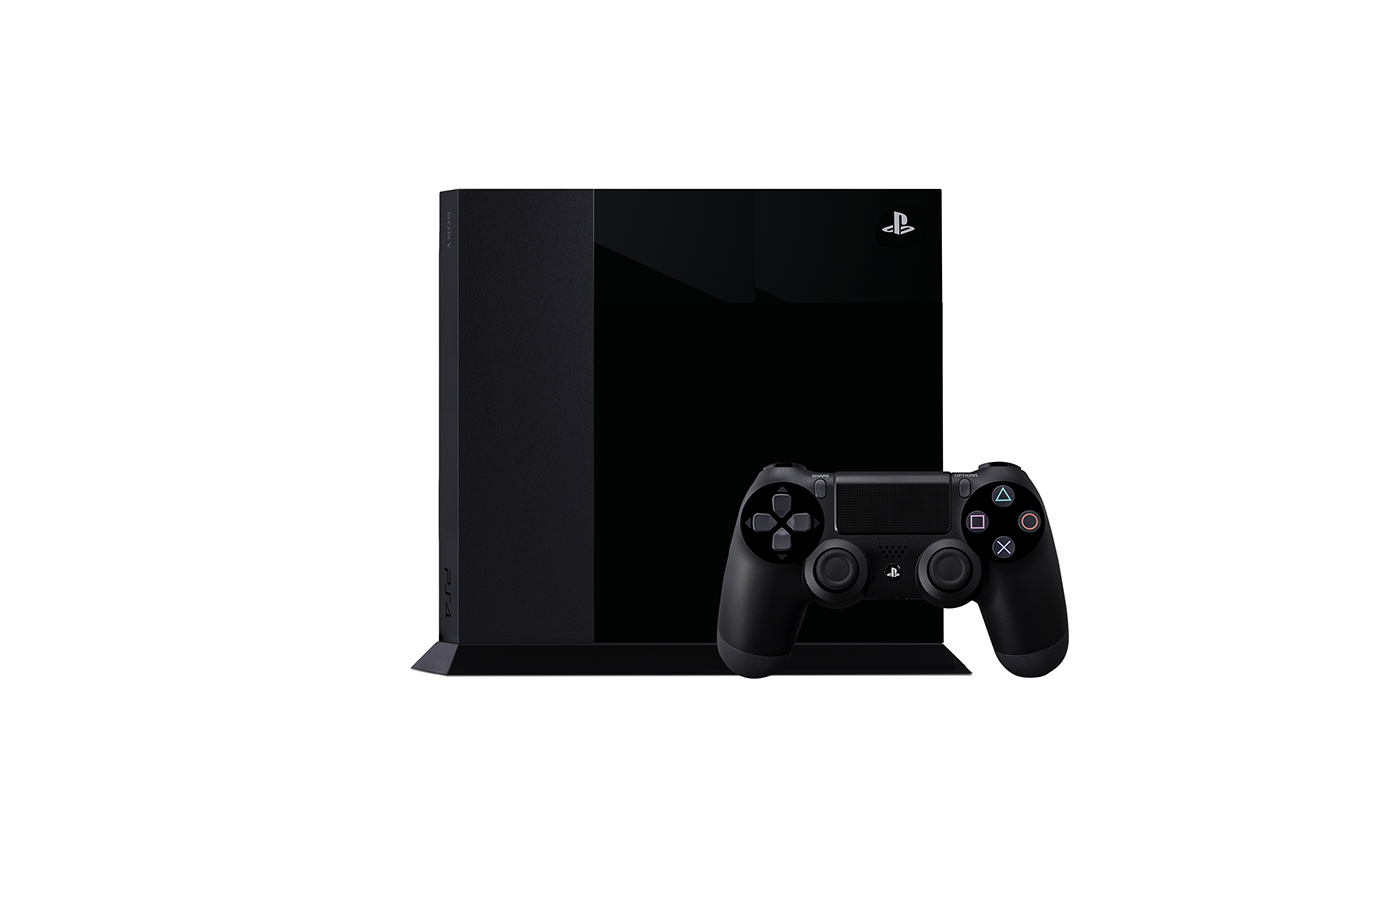 product playstation concept design industrial Ps4 Slim